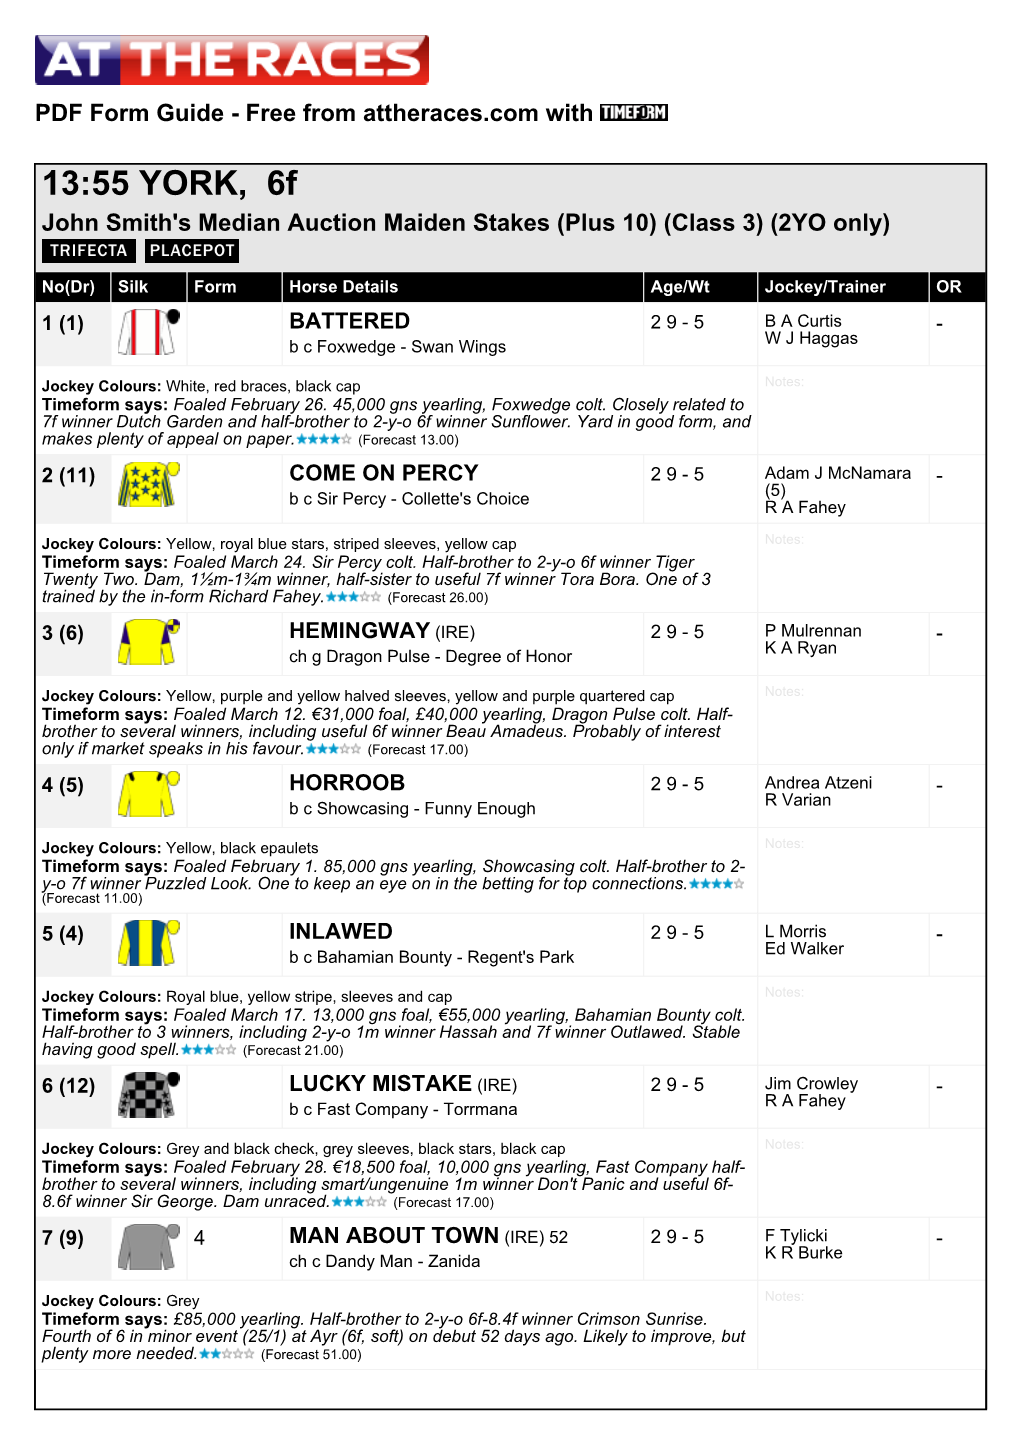 13:55 YORK, 6F John Smith's Median Auction Maiden Stakes (Plus 10) (Class 3) (2YO Only)